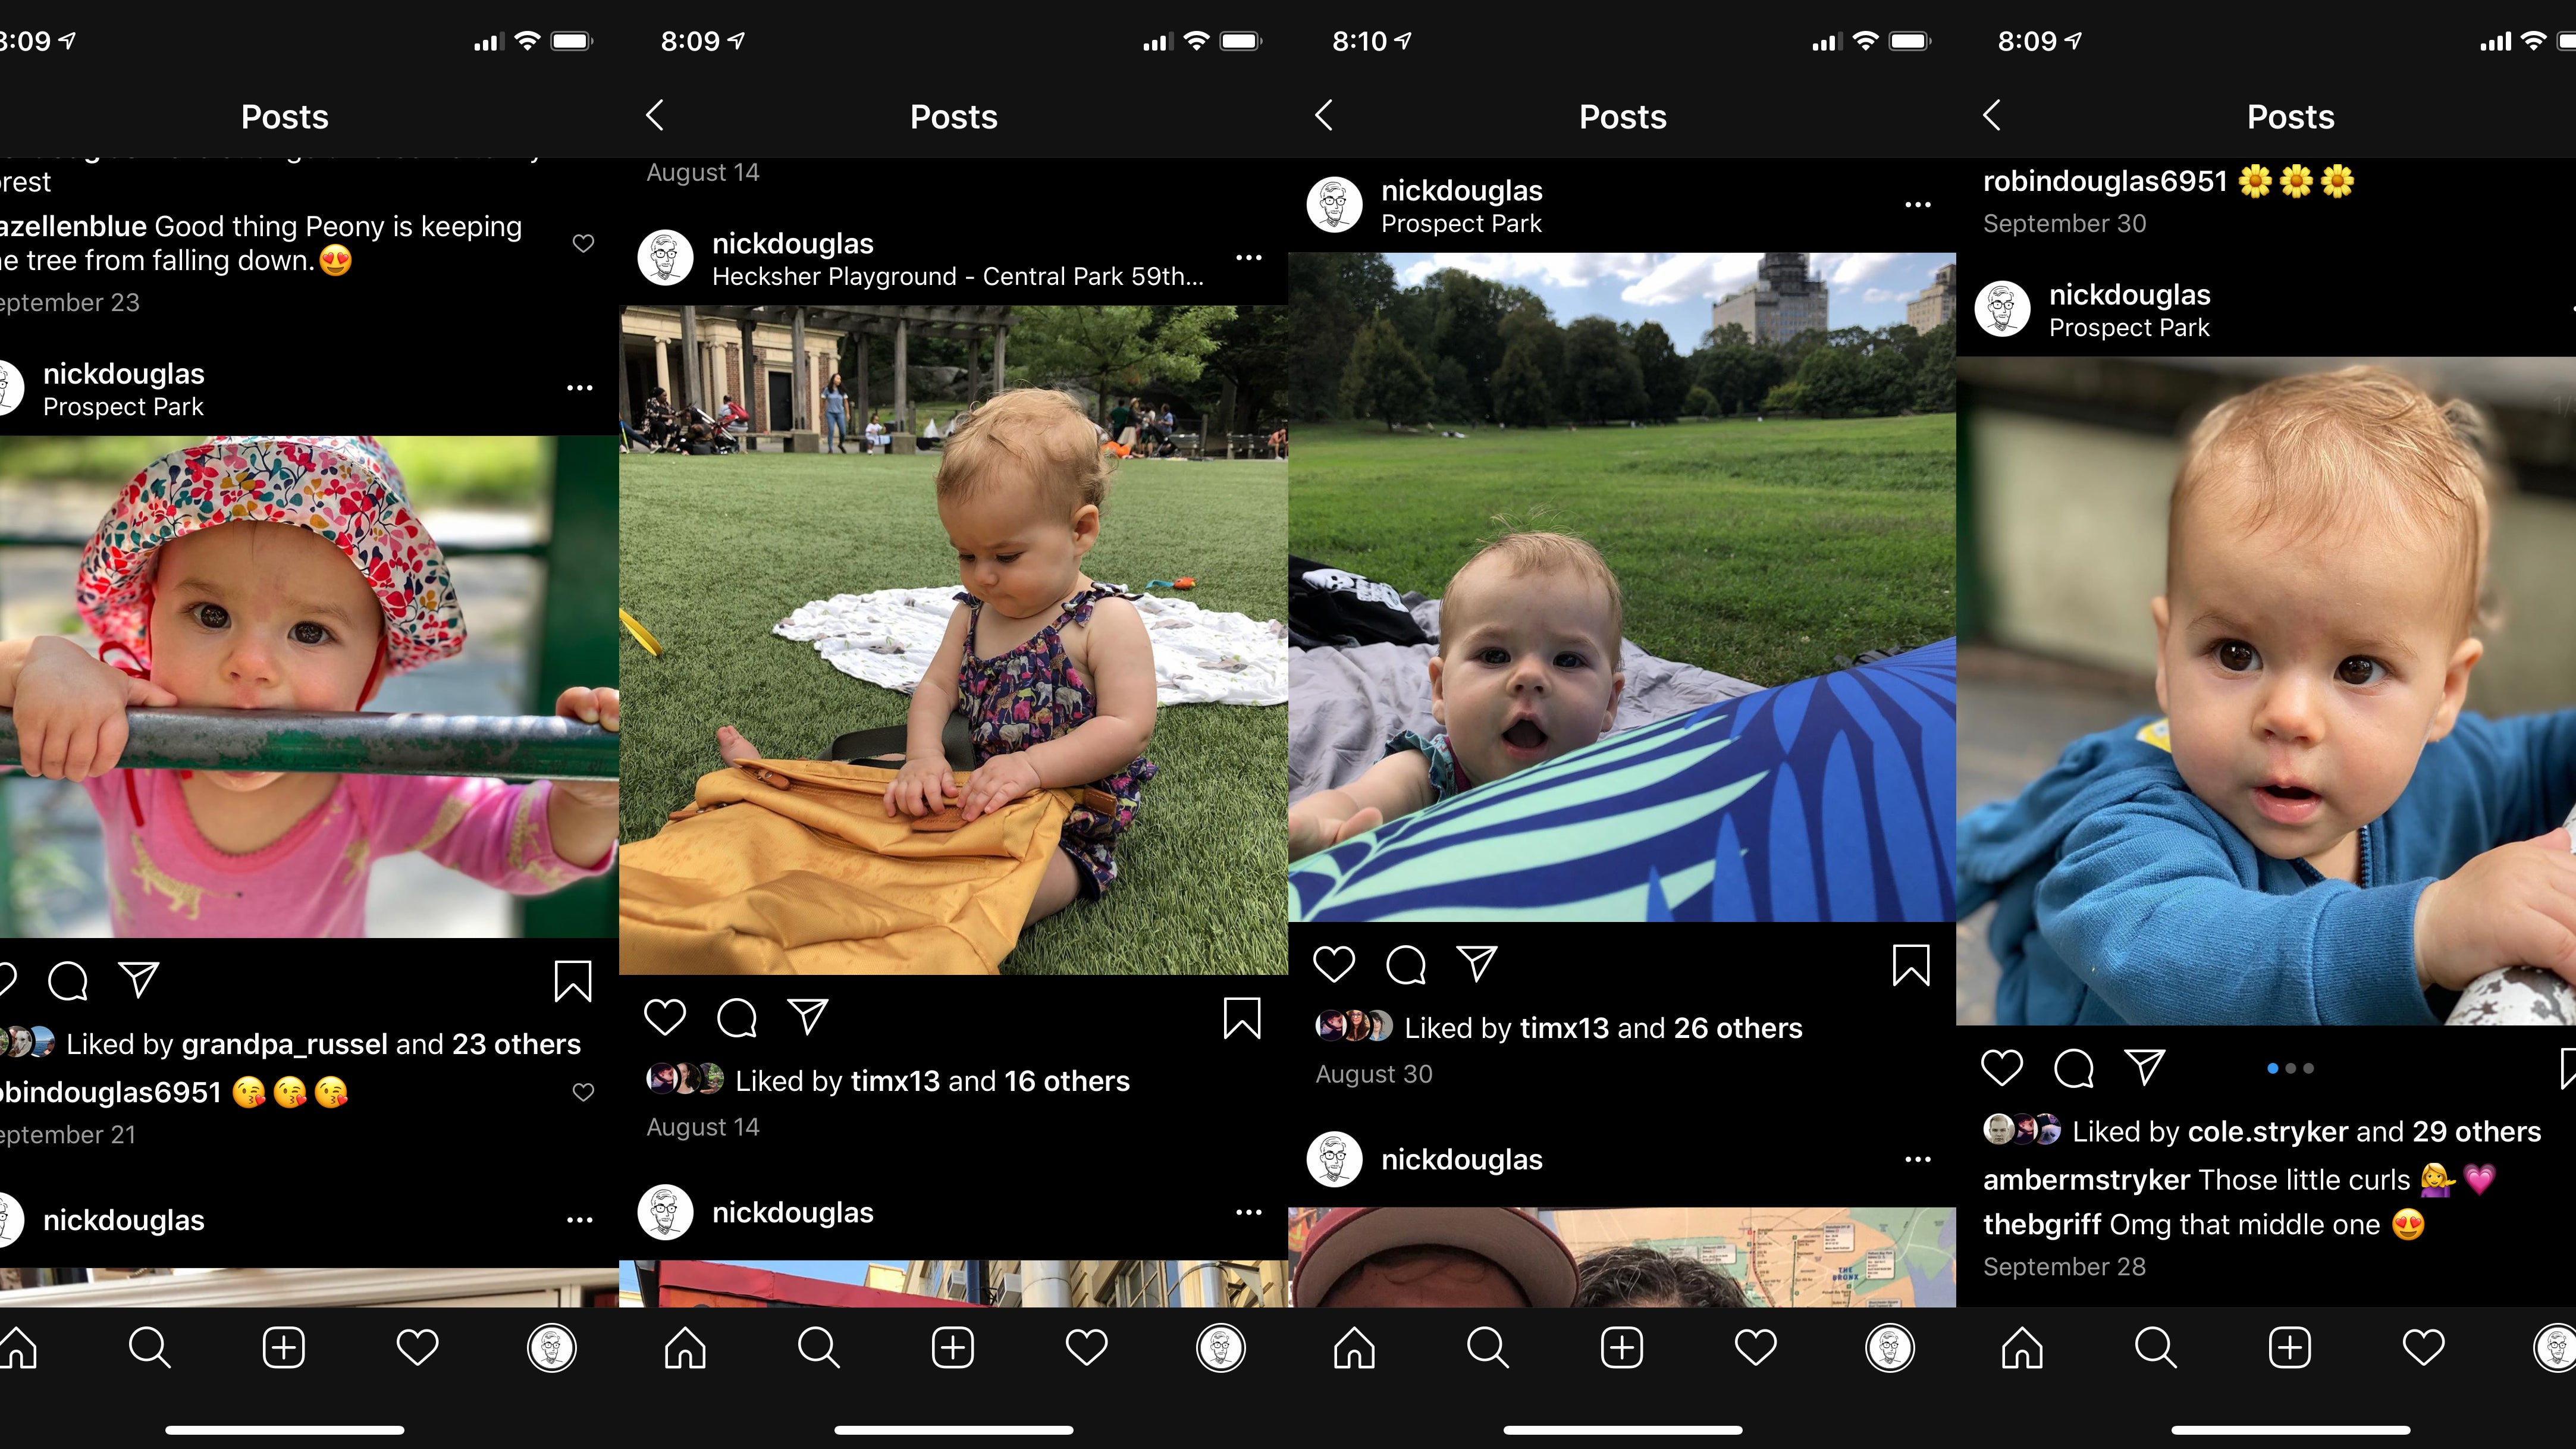 How To Enable Dark Mode On Instagram